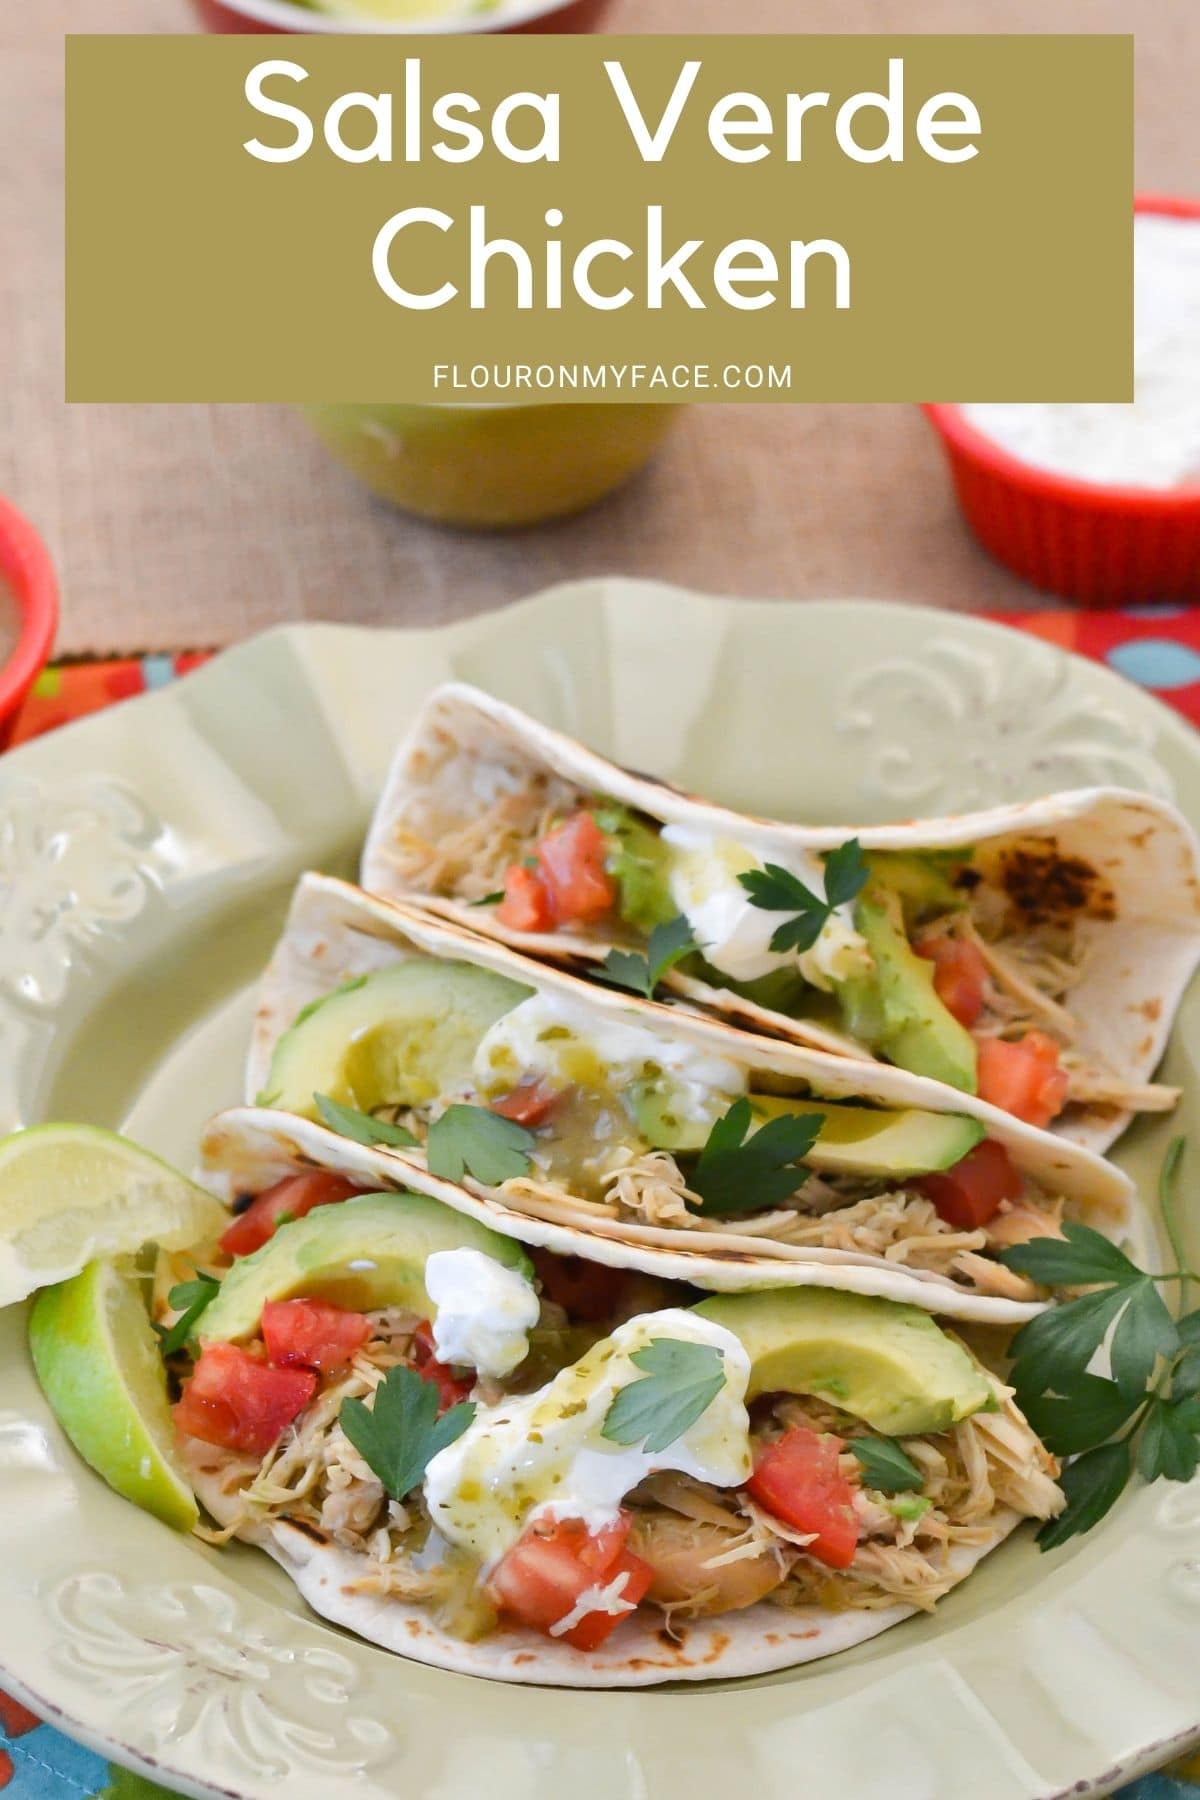 Crock Pot Salsa Verde Chicken Tacos with toppings on a plate.